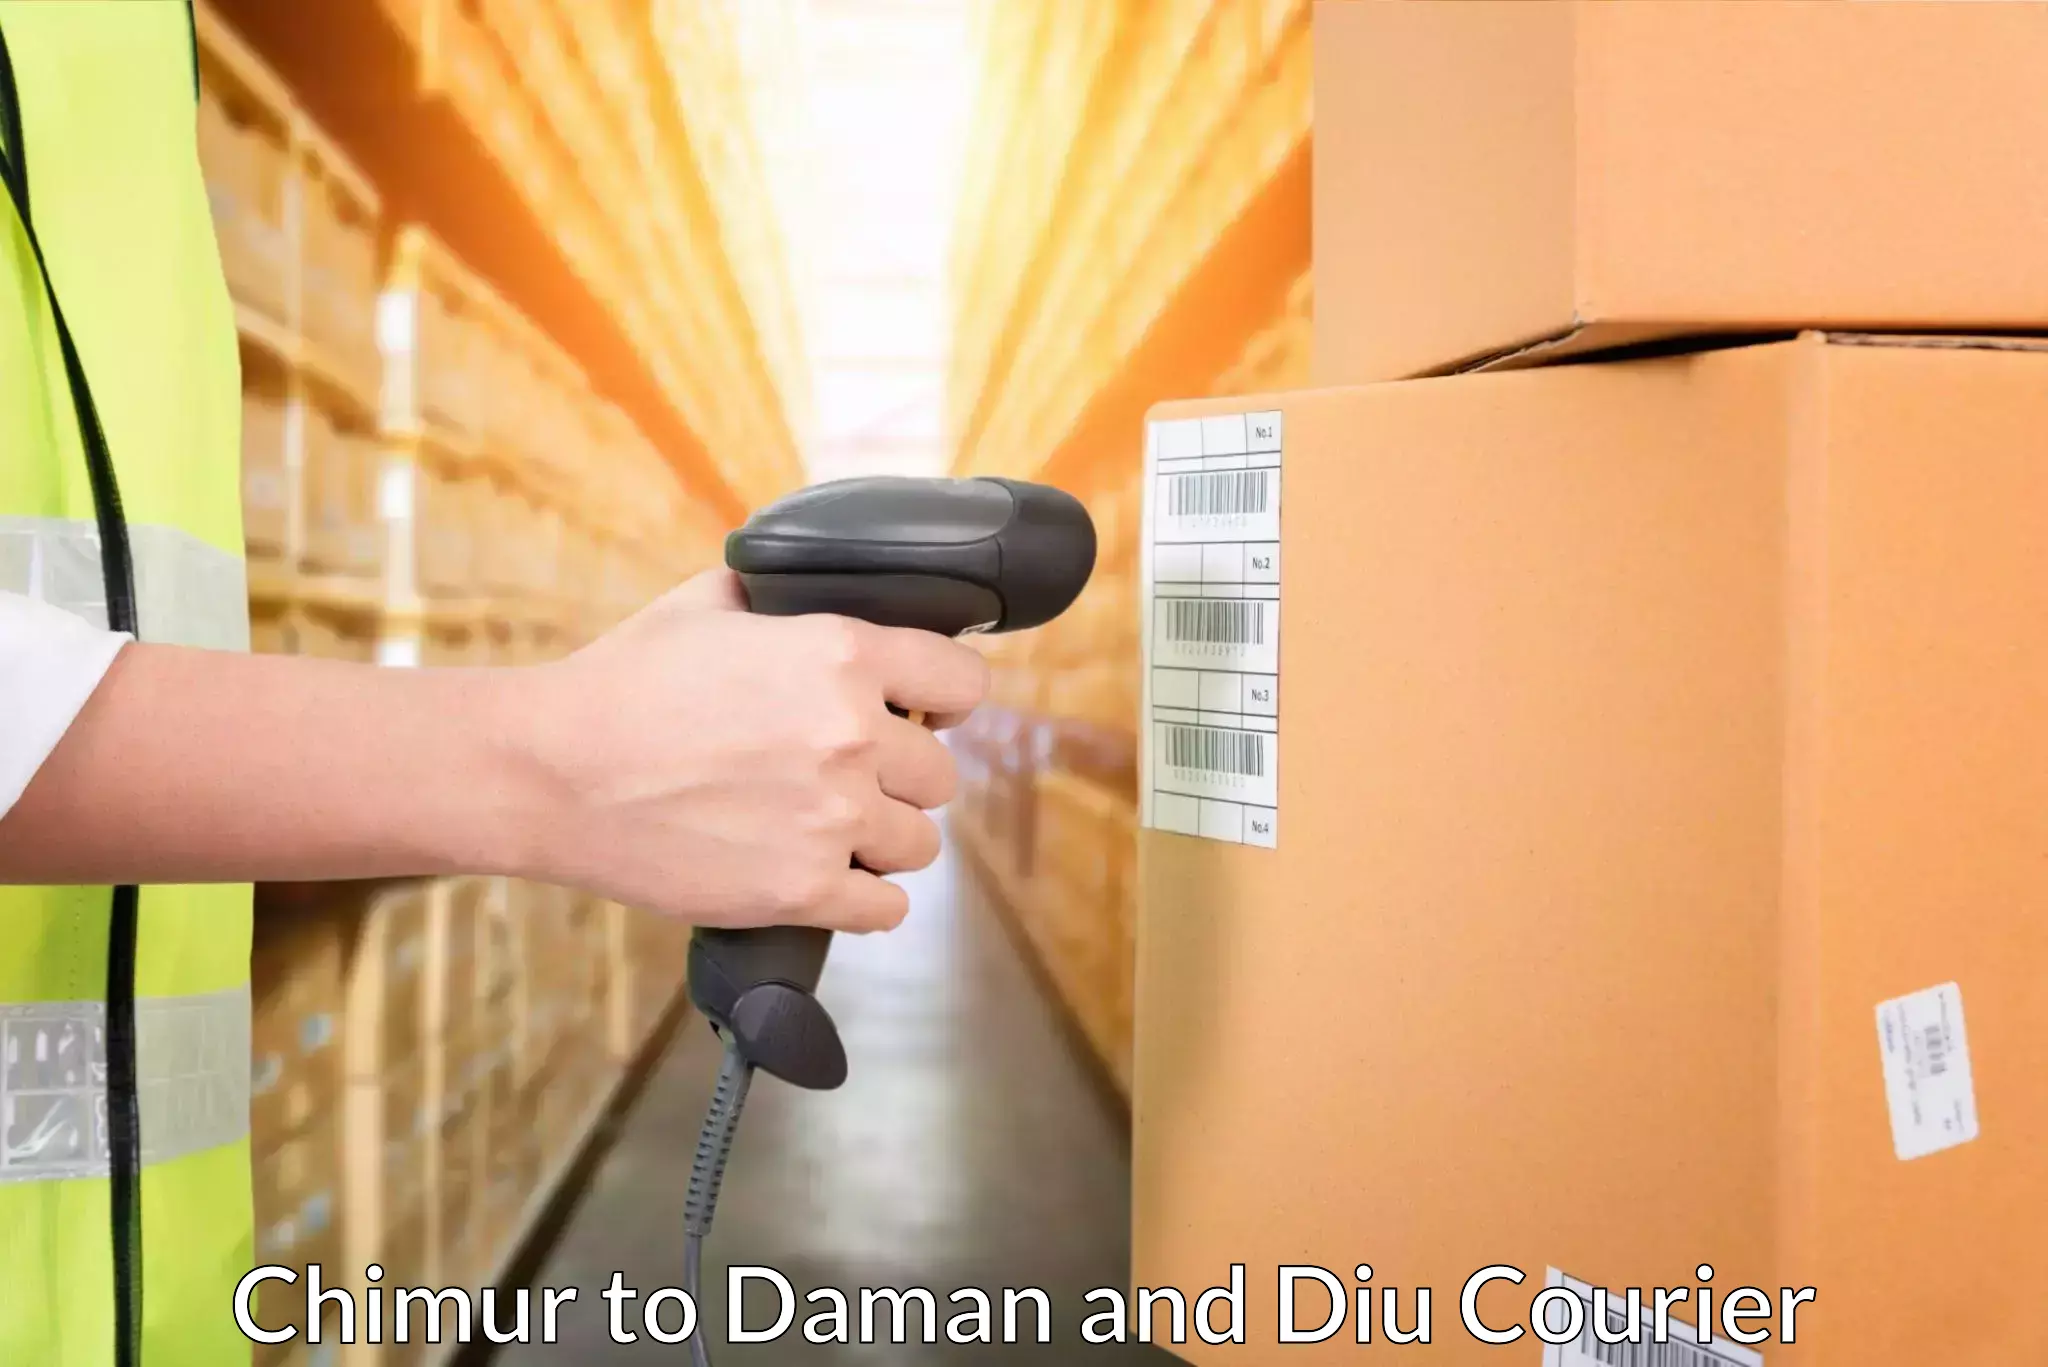 Quality courier partnerships Chimur to Daman and Diu